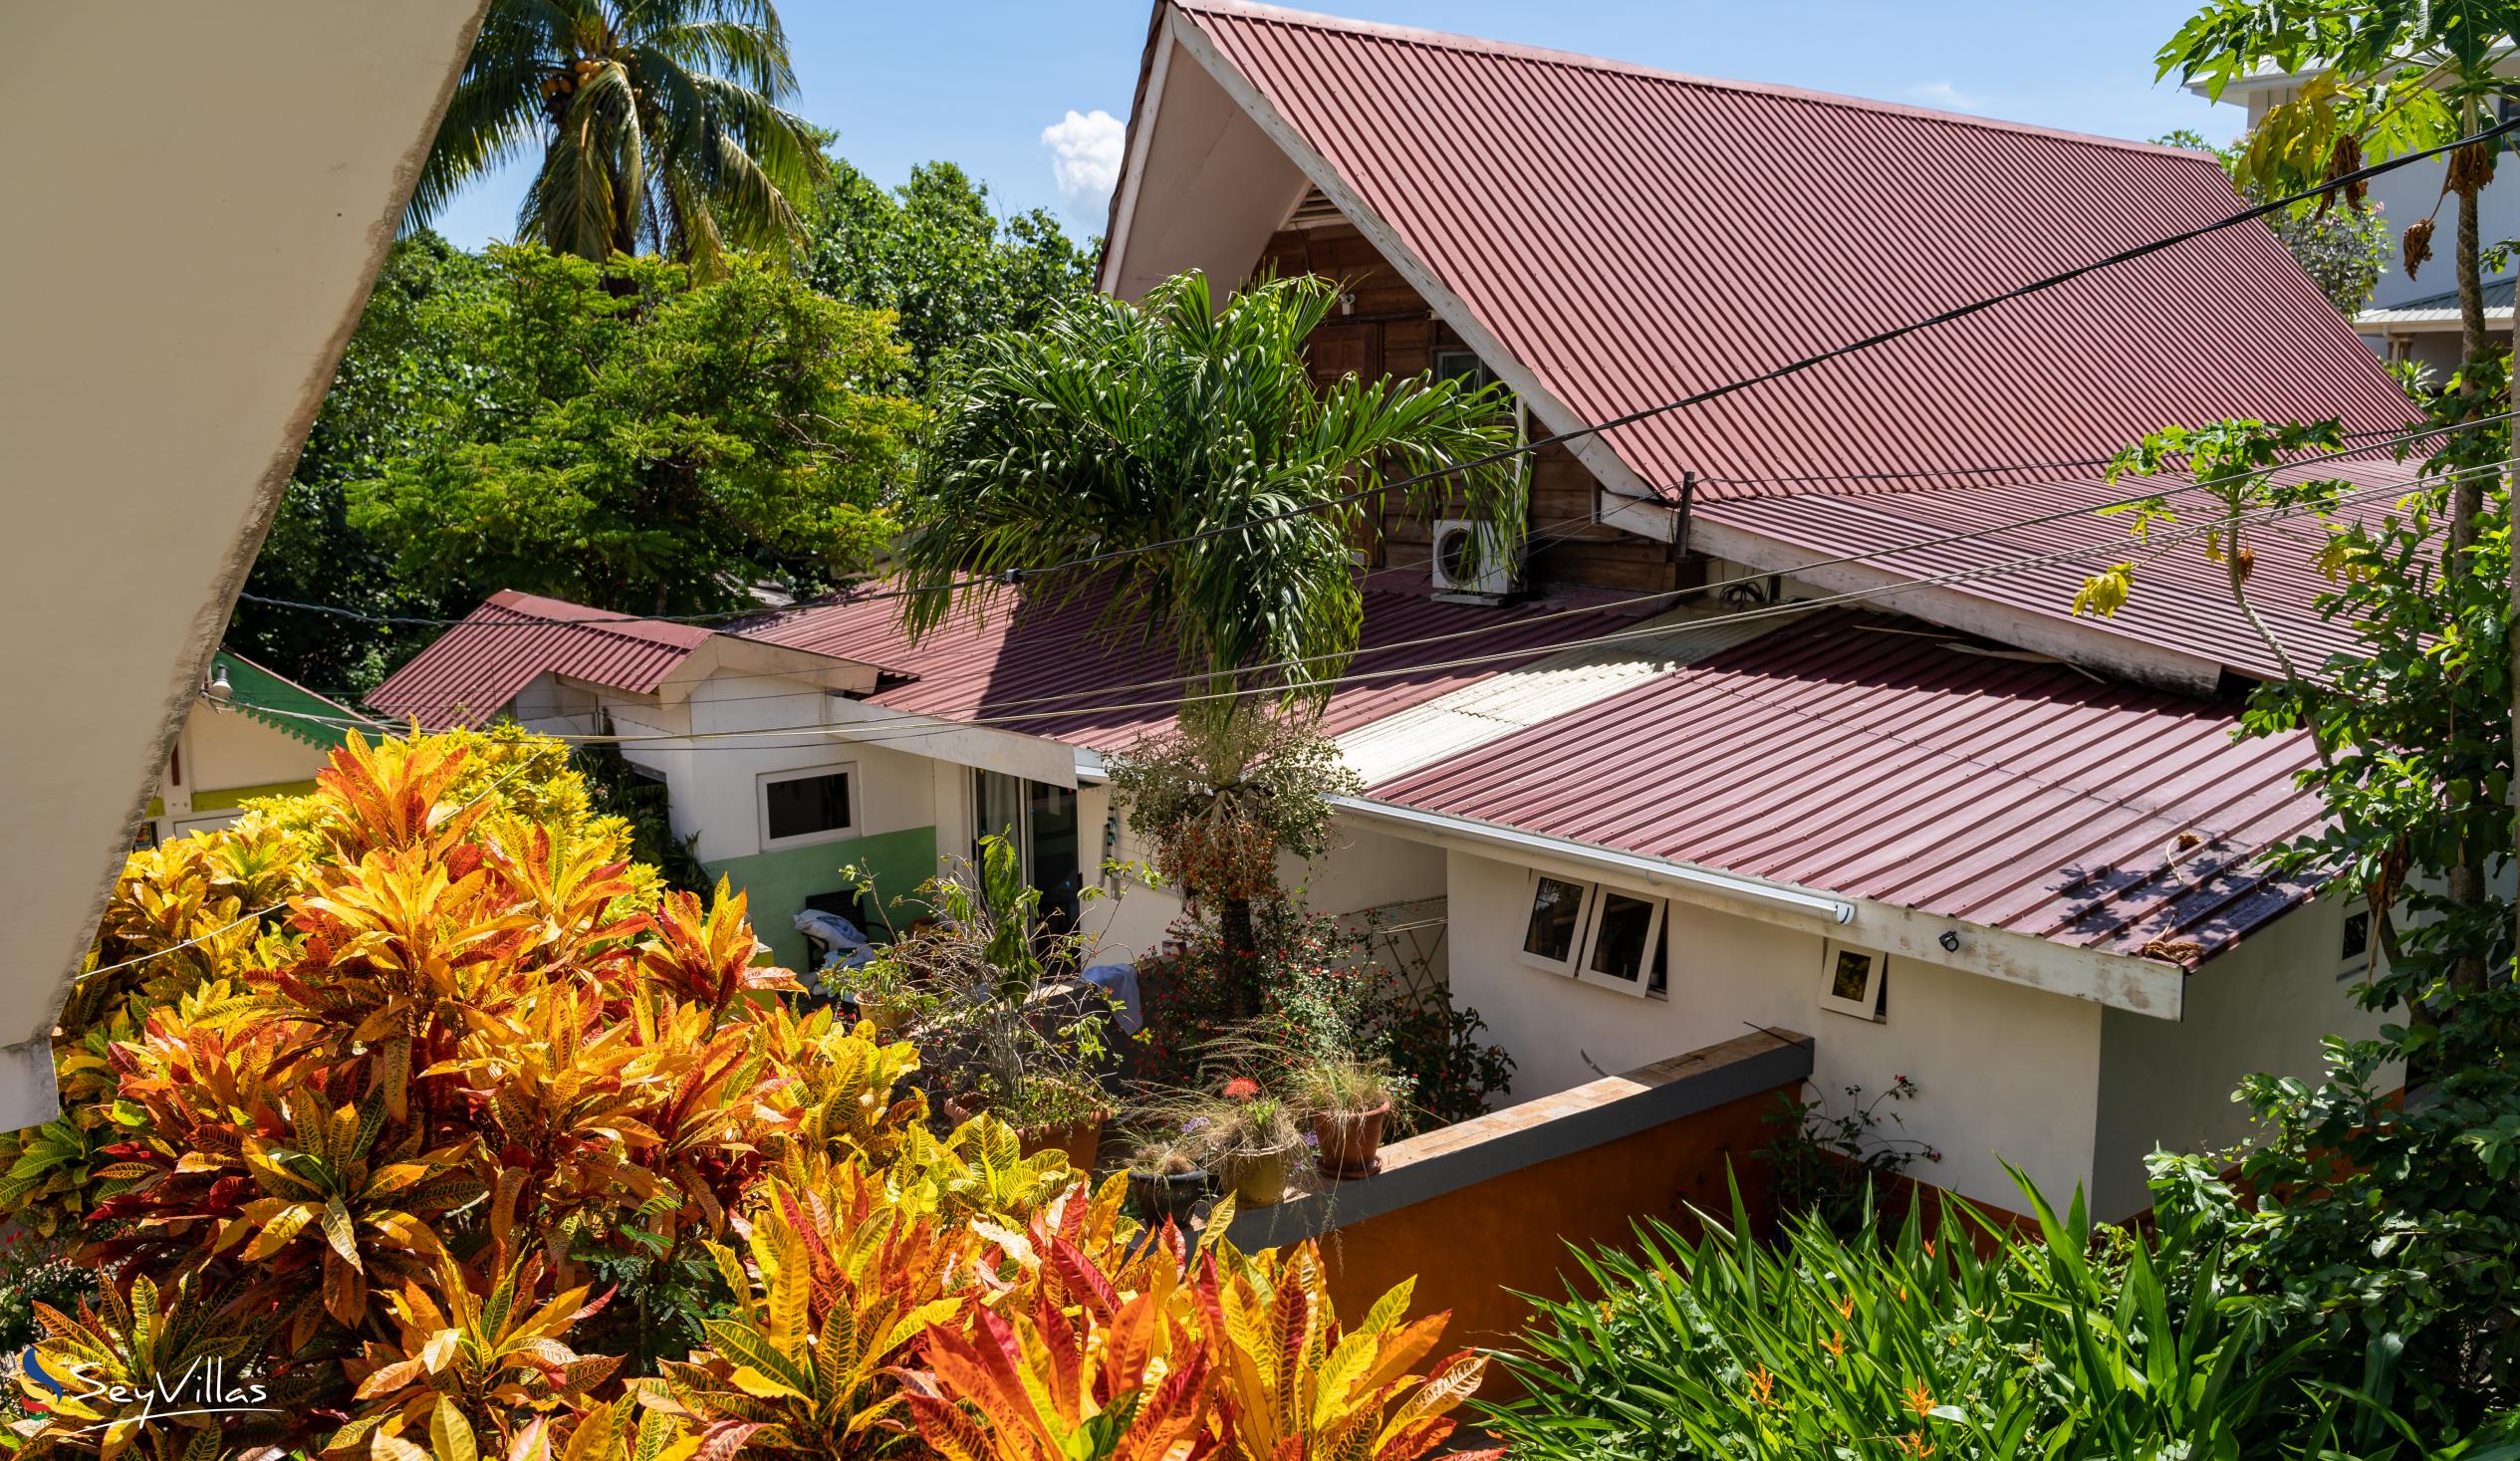 Photo 12: Chez Payet Self Catering - Outdoor area - Mahé (Seychelles)